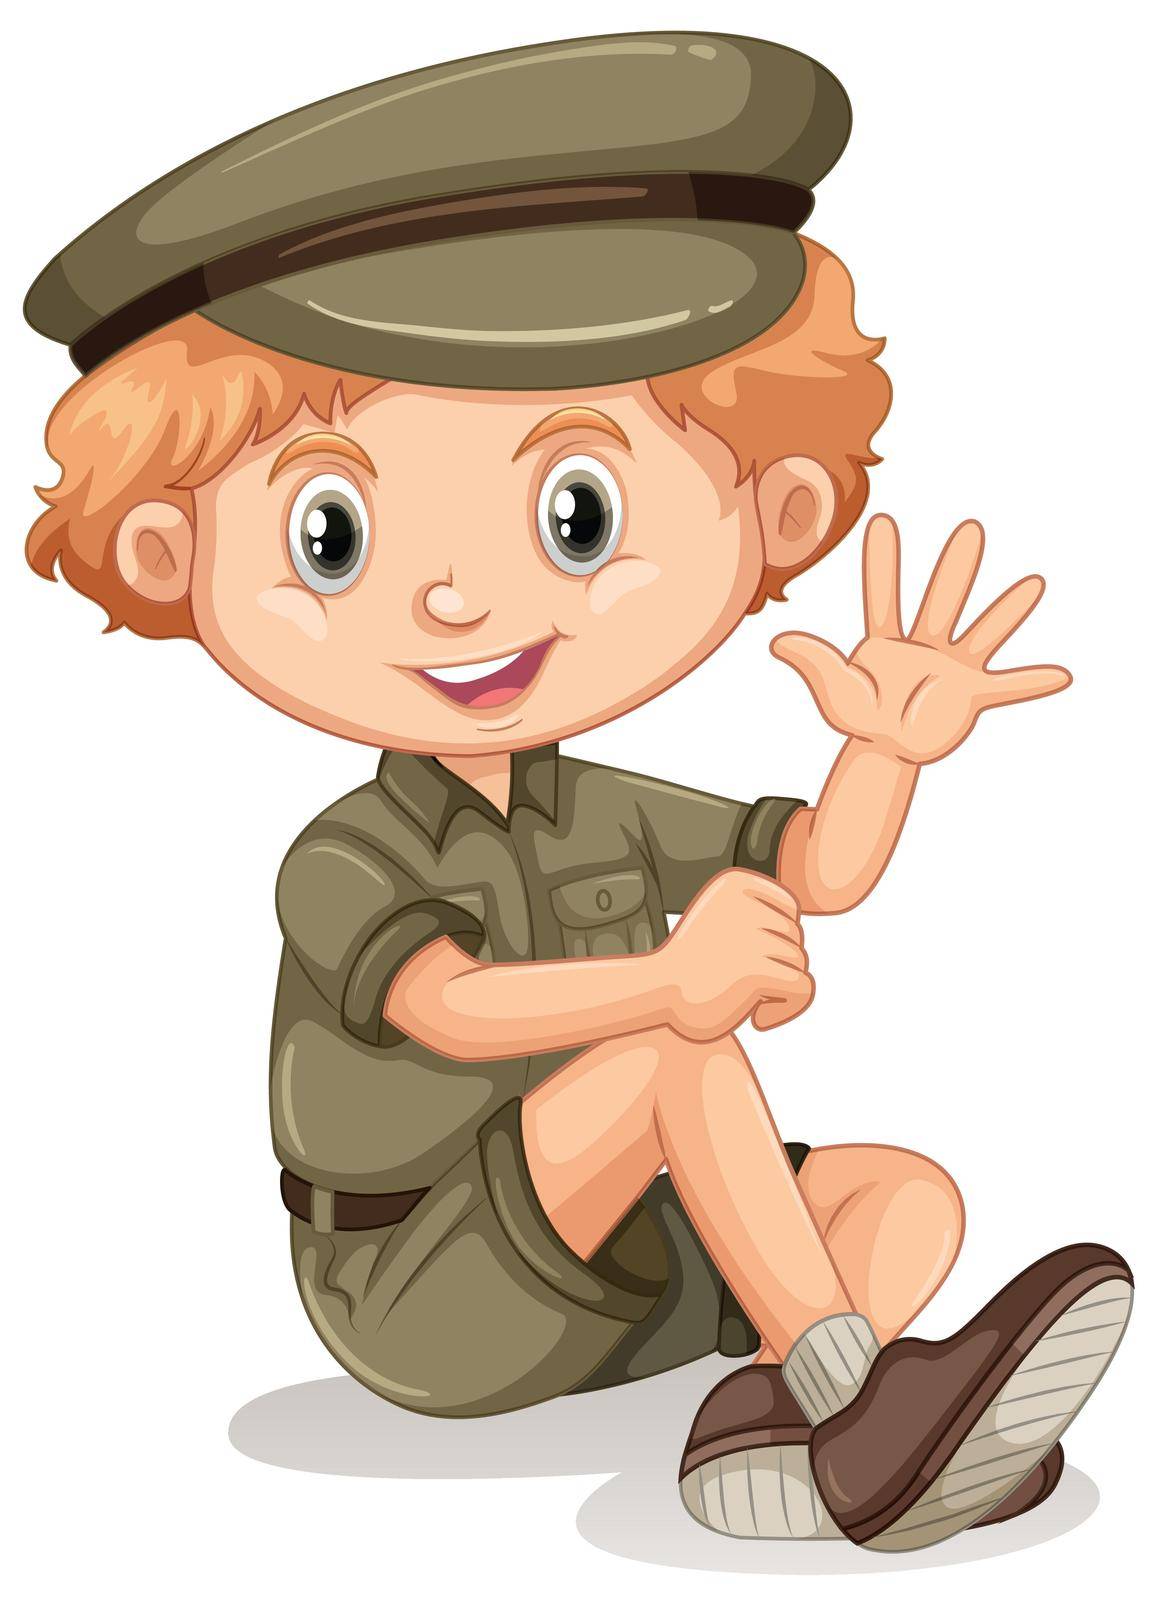 A happy boy sitting in a safari outfit illustration